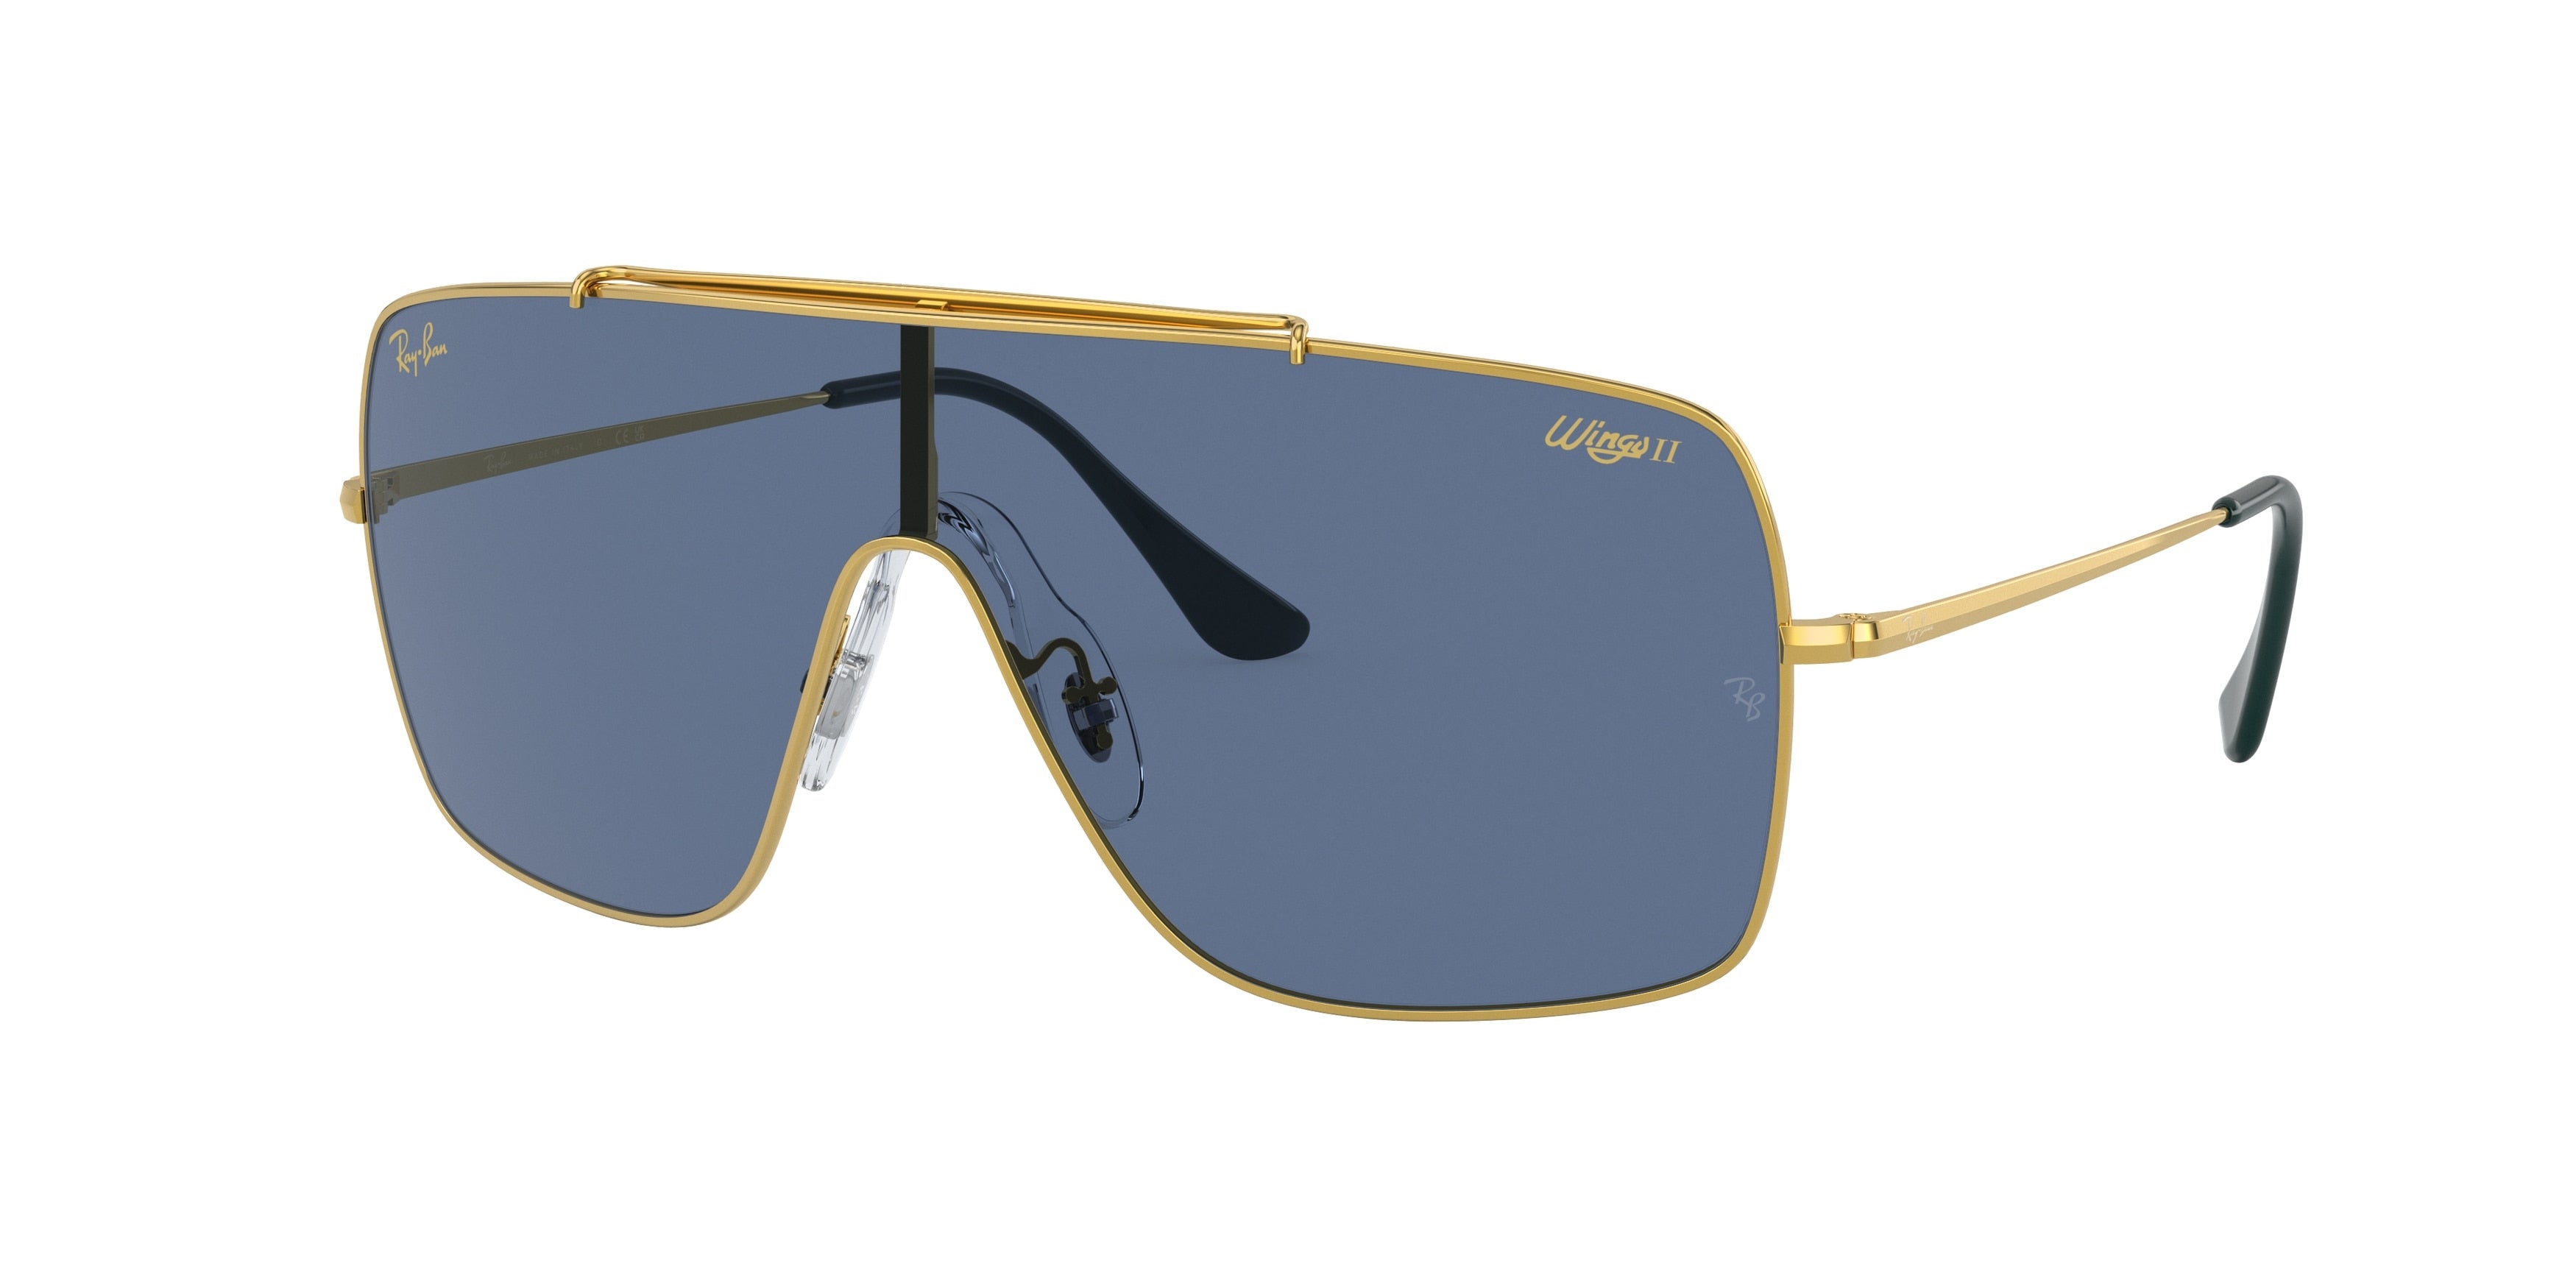 Ray-Ban WINGS II RB3697 Square Sunglasses  924580-Gold 35-140-135 - Color Map Gold